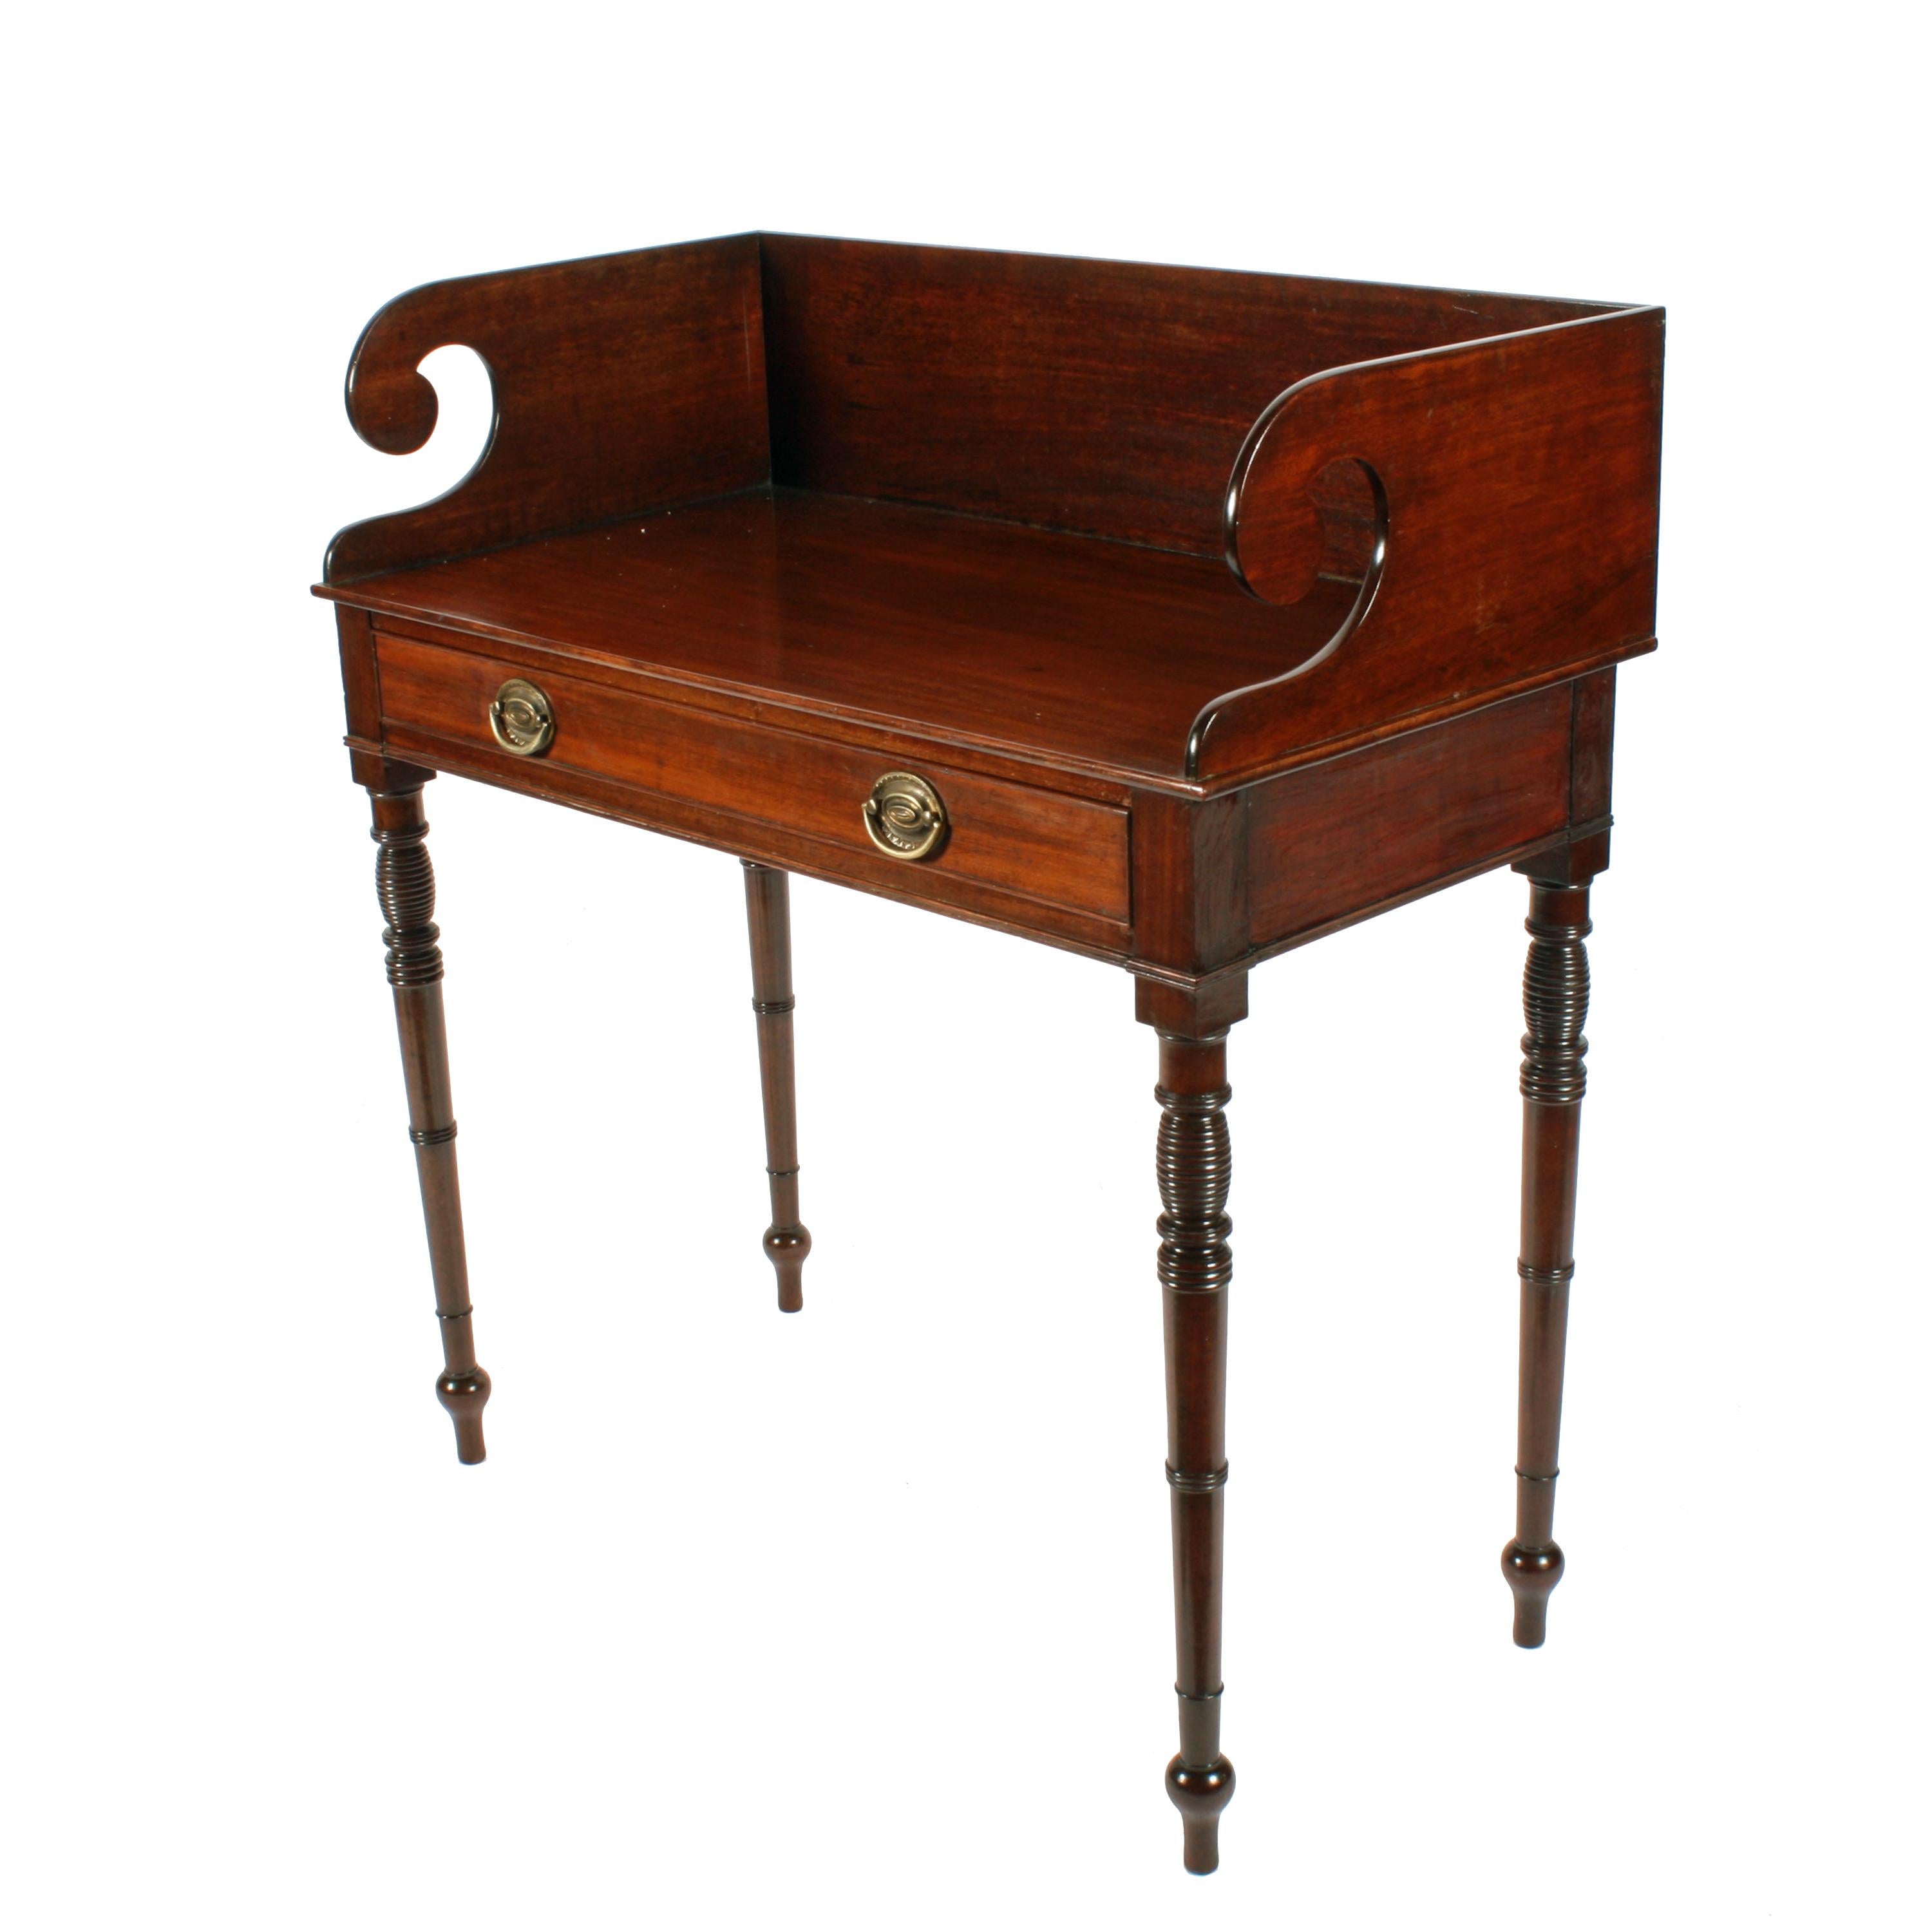 A Georgian mahogany one drawer side table.

The table has a shaped gallery back and four turned tapering legs with decorative ring turned details.

The long slim drawer is lined with solid mahogany, the drawer fronts have a cock bead edge and